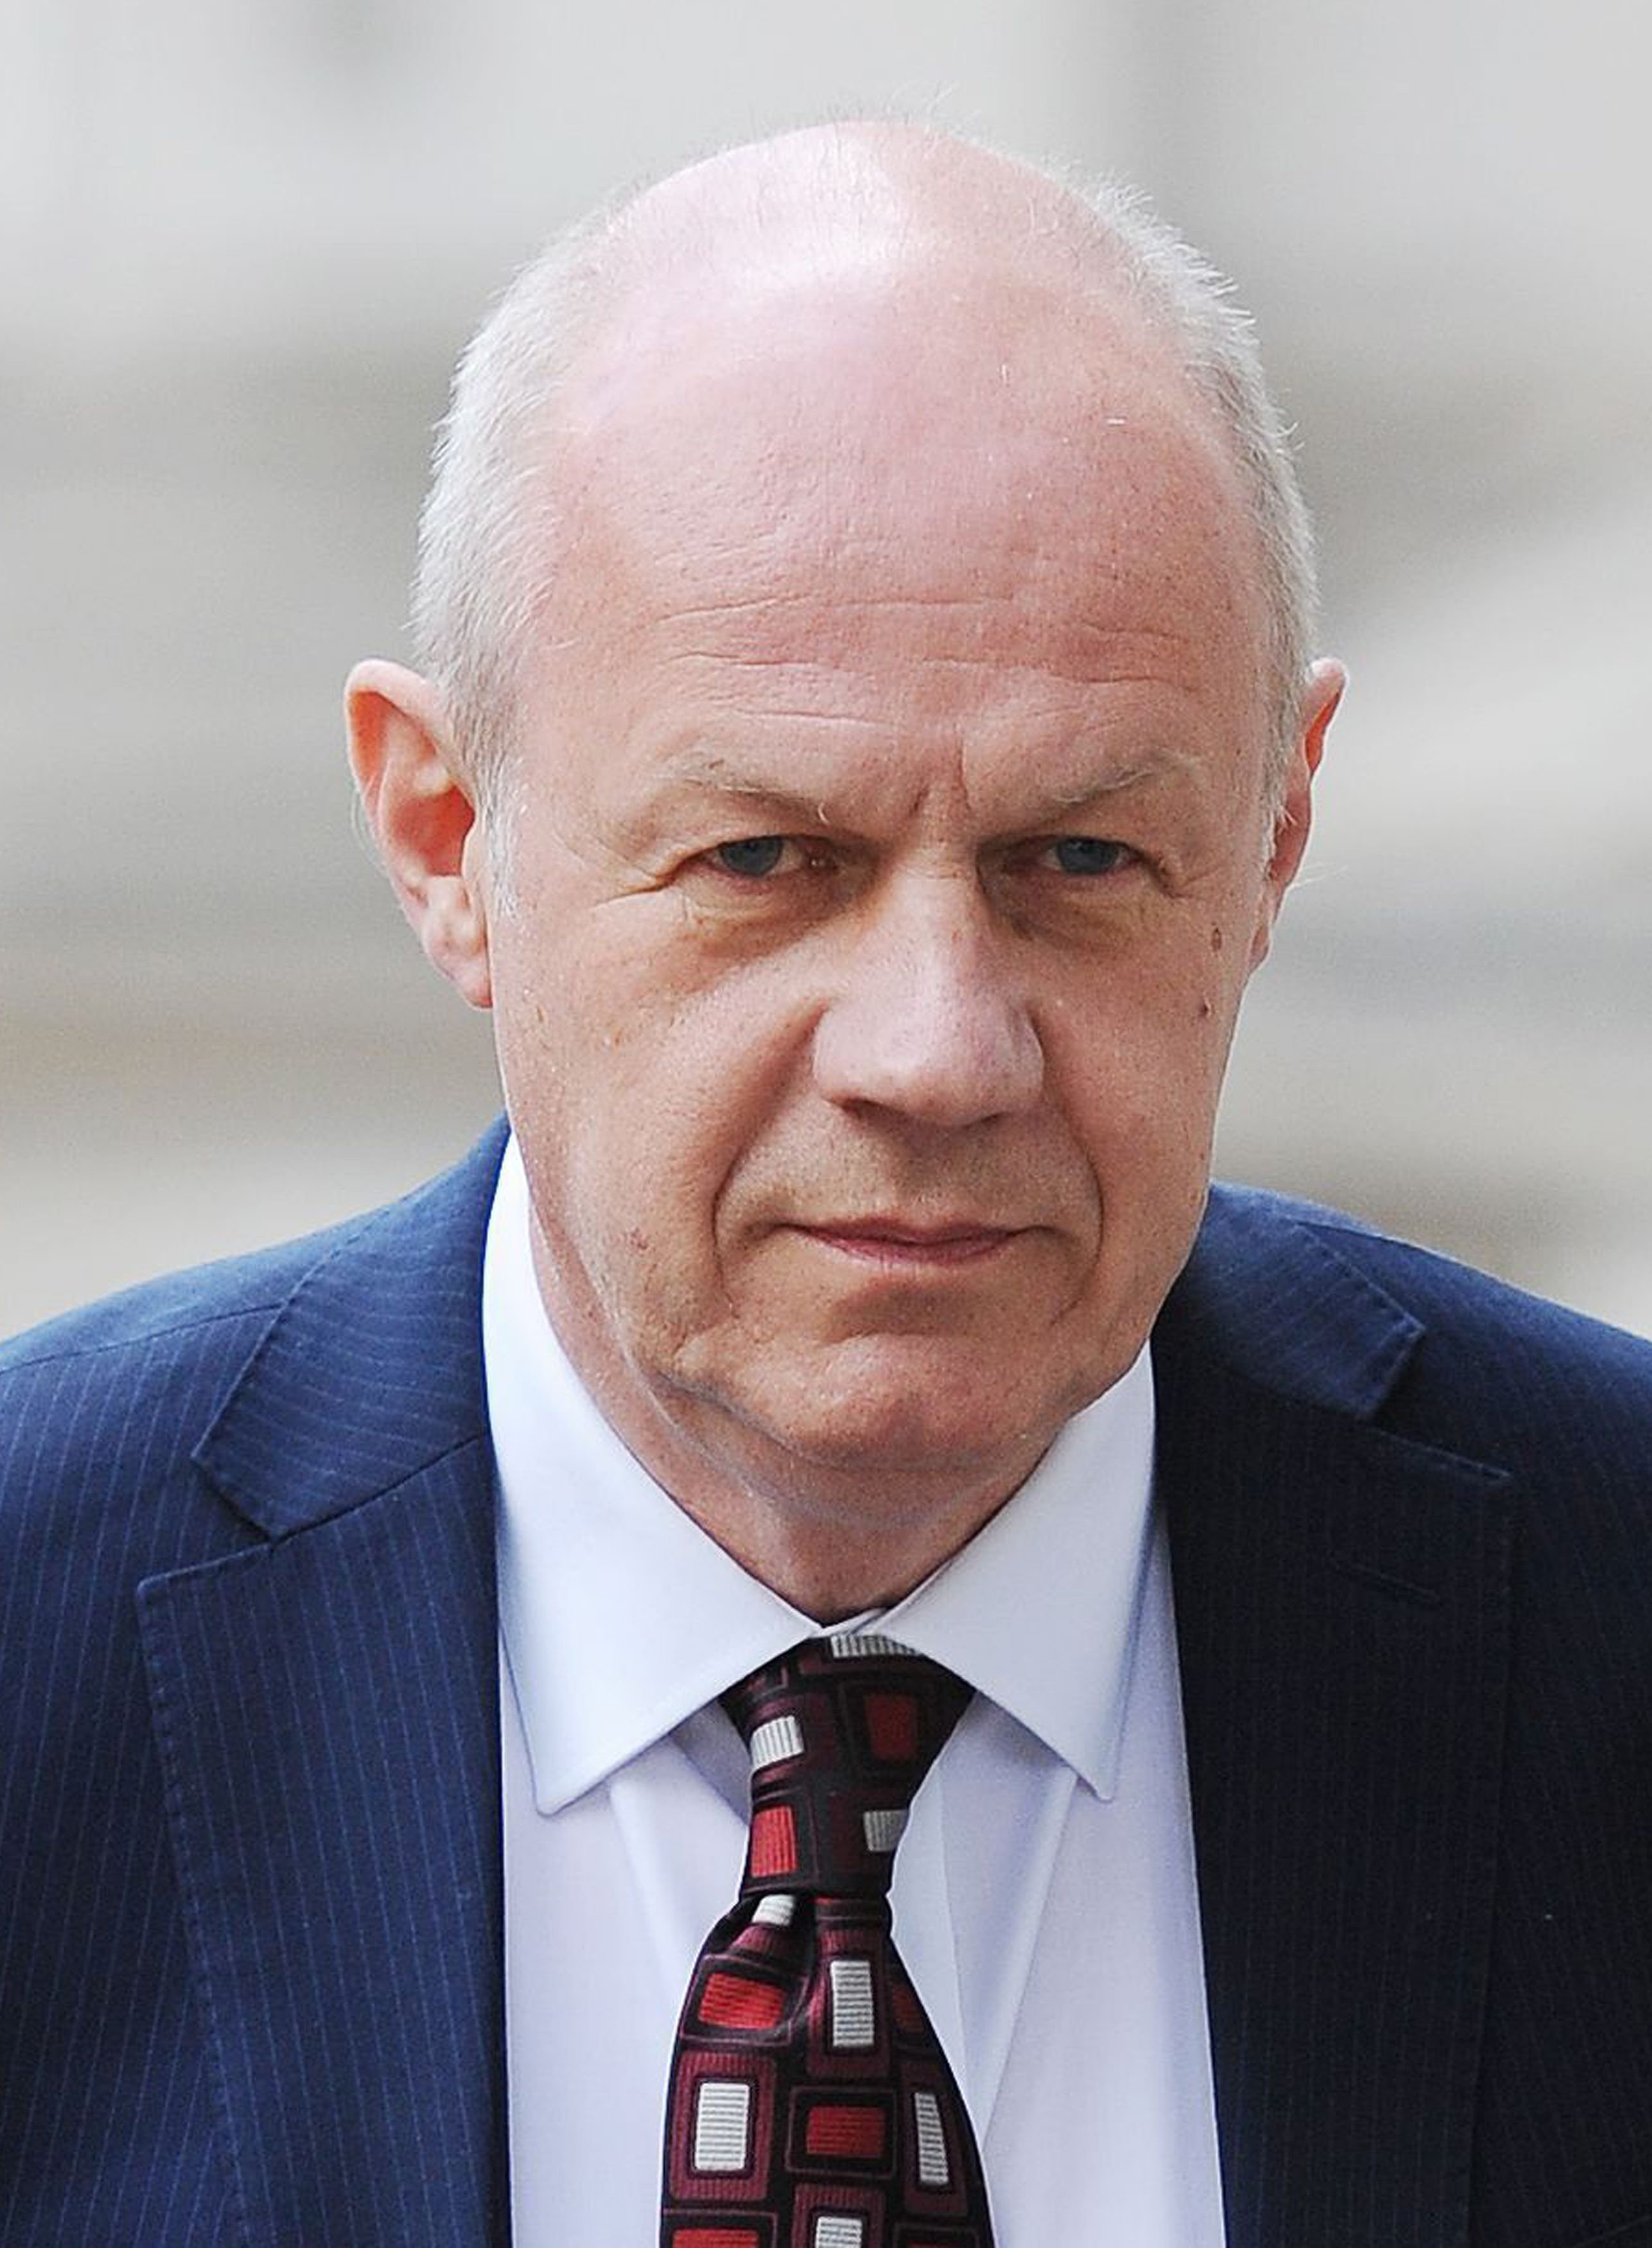 <strong>It has been alleged that thousands of pornographic images were found on Damian Green's Commons computer during an investigation in 2008&nbsp;</strong>